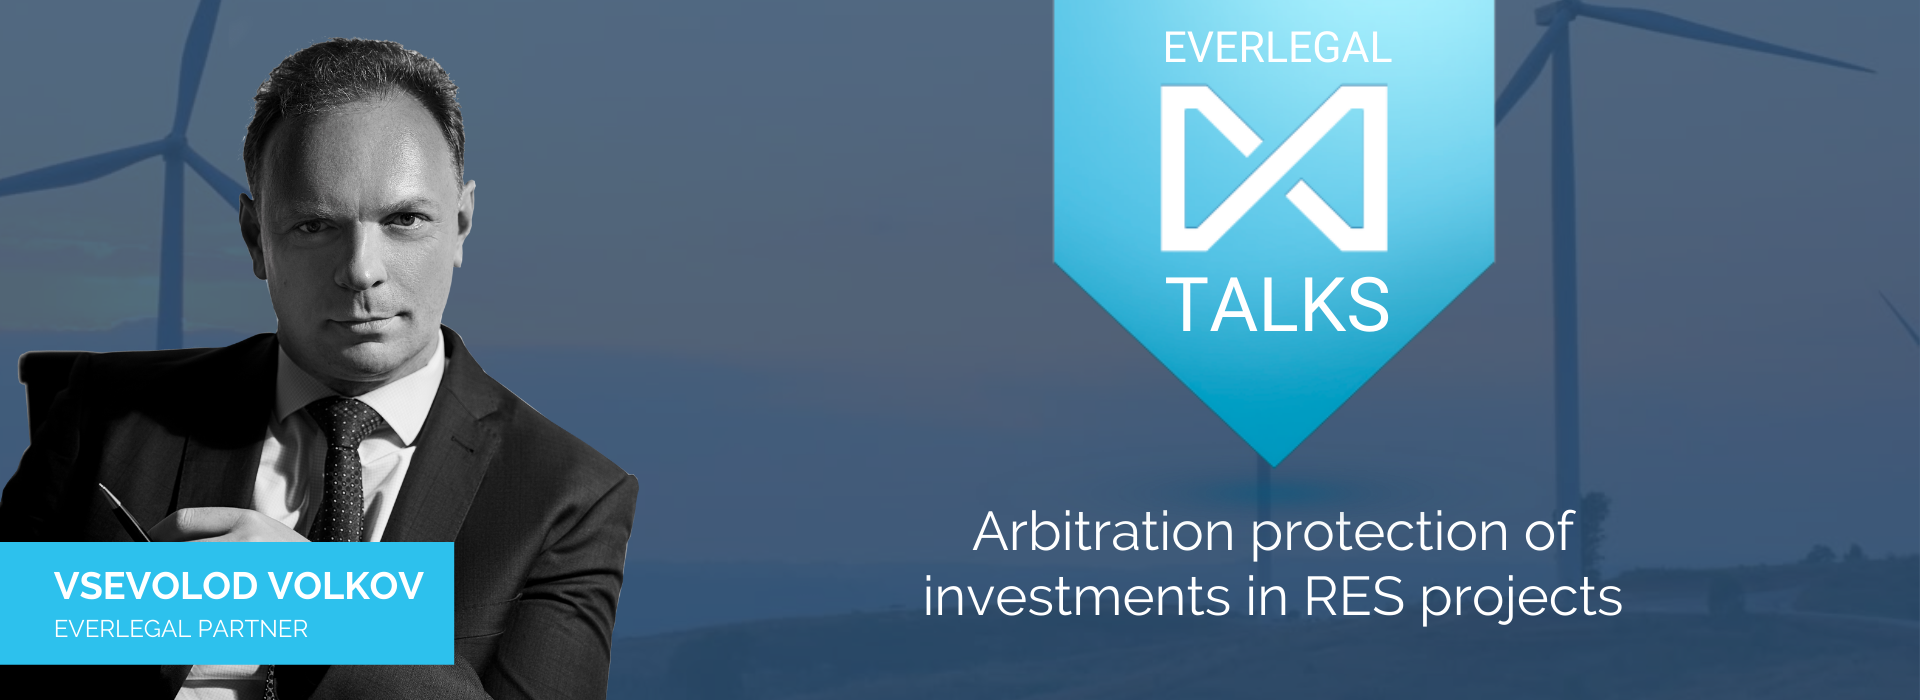 EverlegalTalks: Vsevolod Volkov on Arbitration Protection of Investments in RES Projects